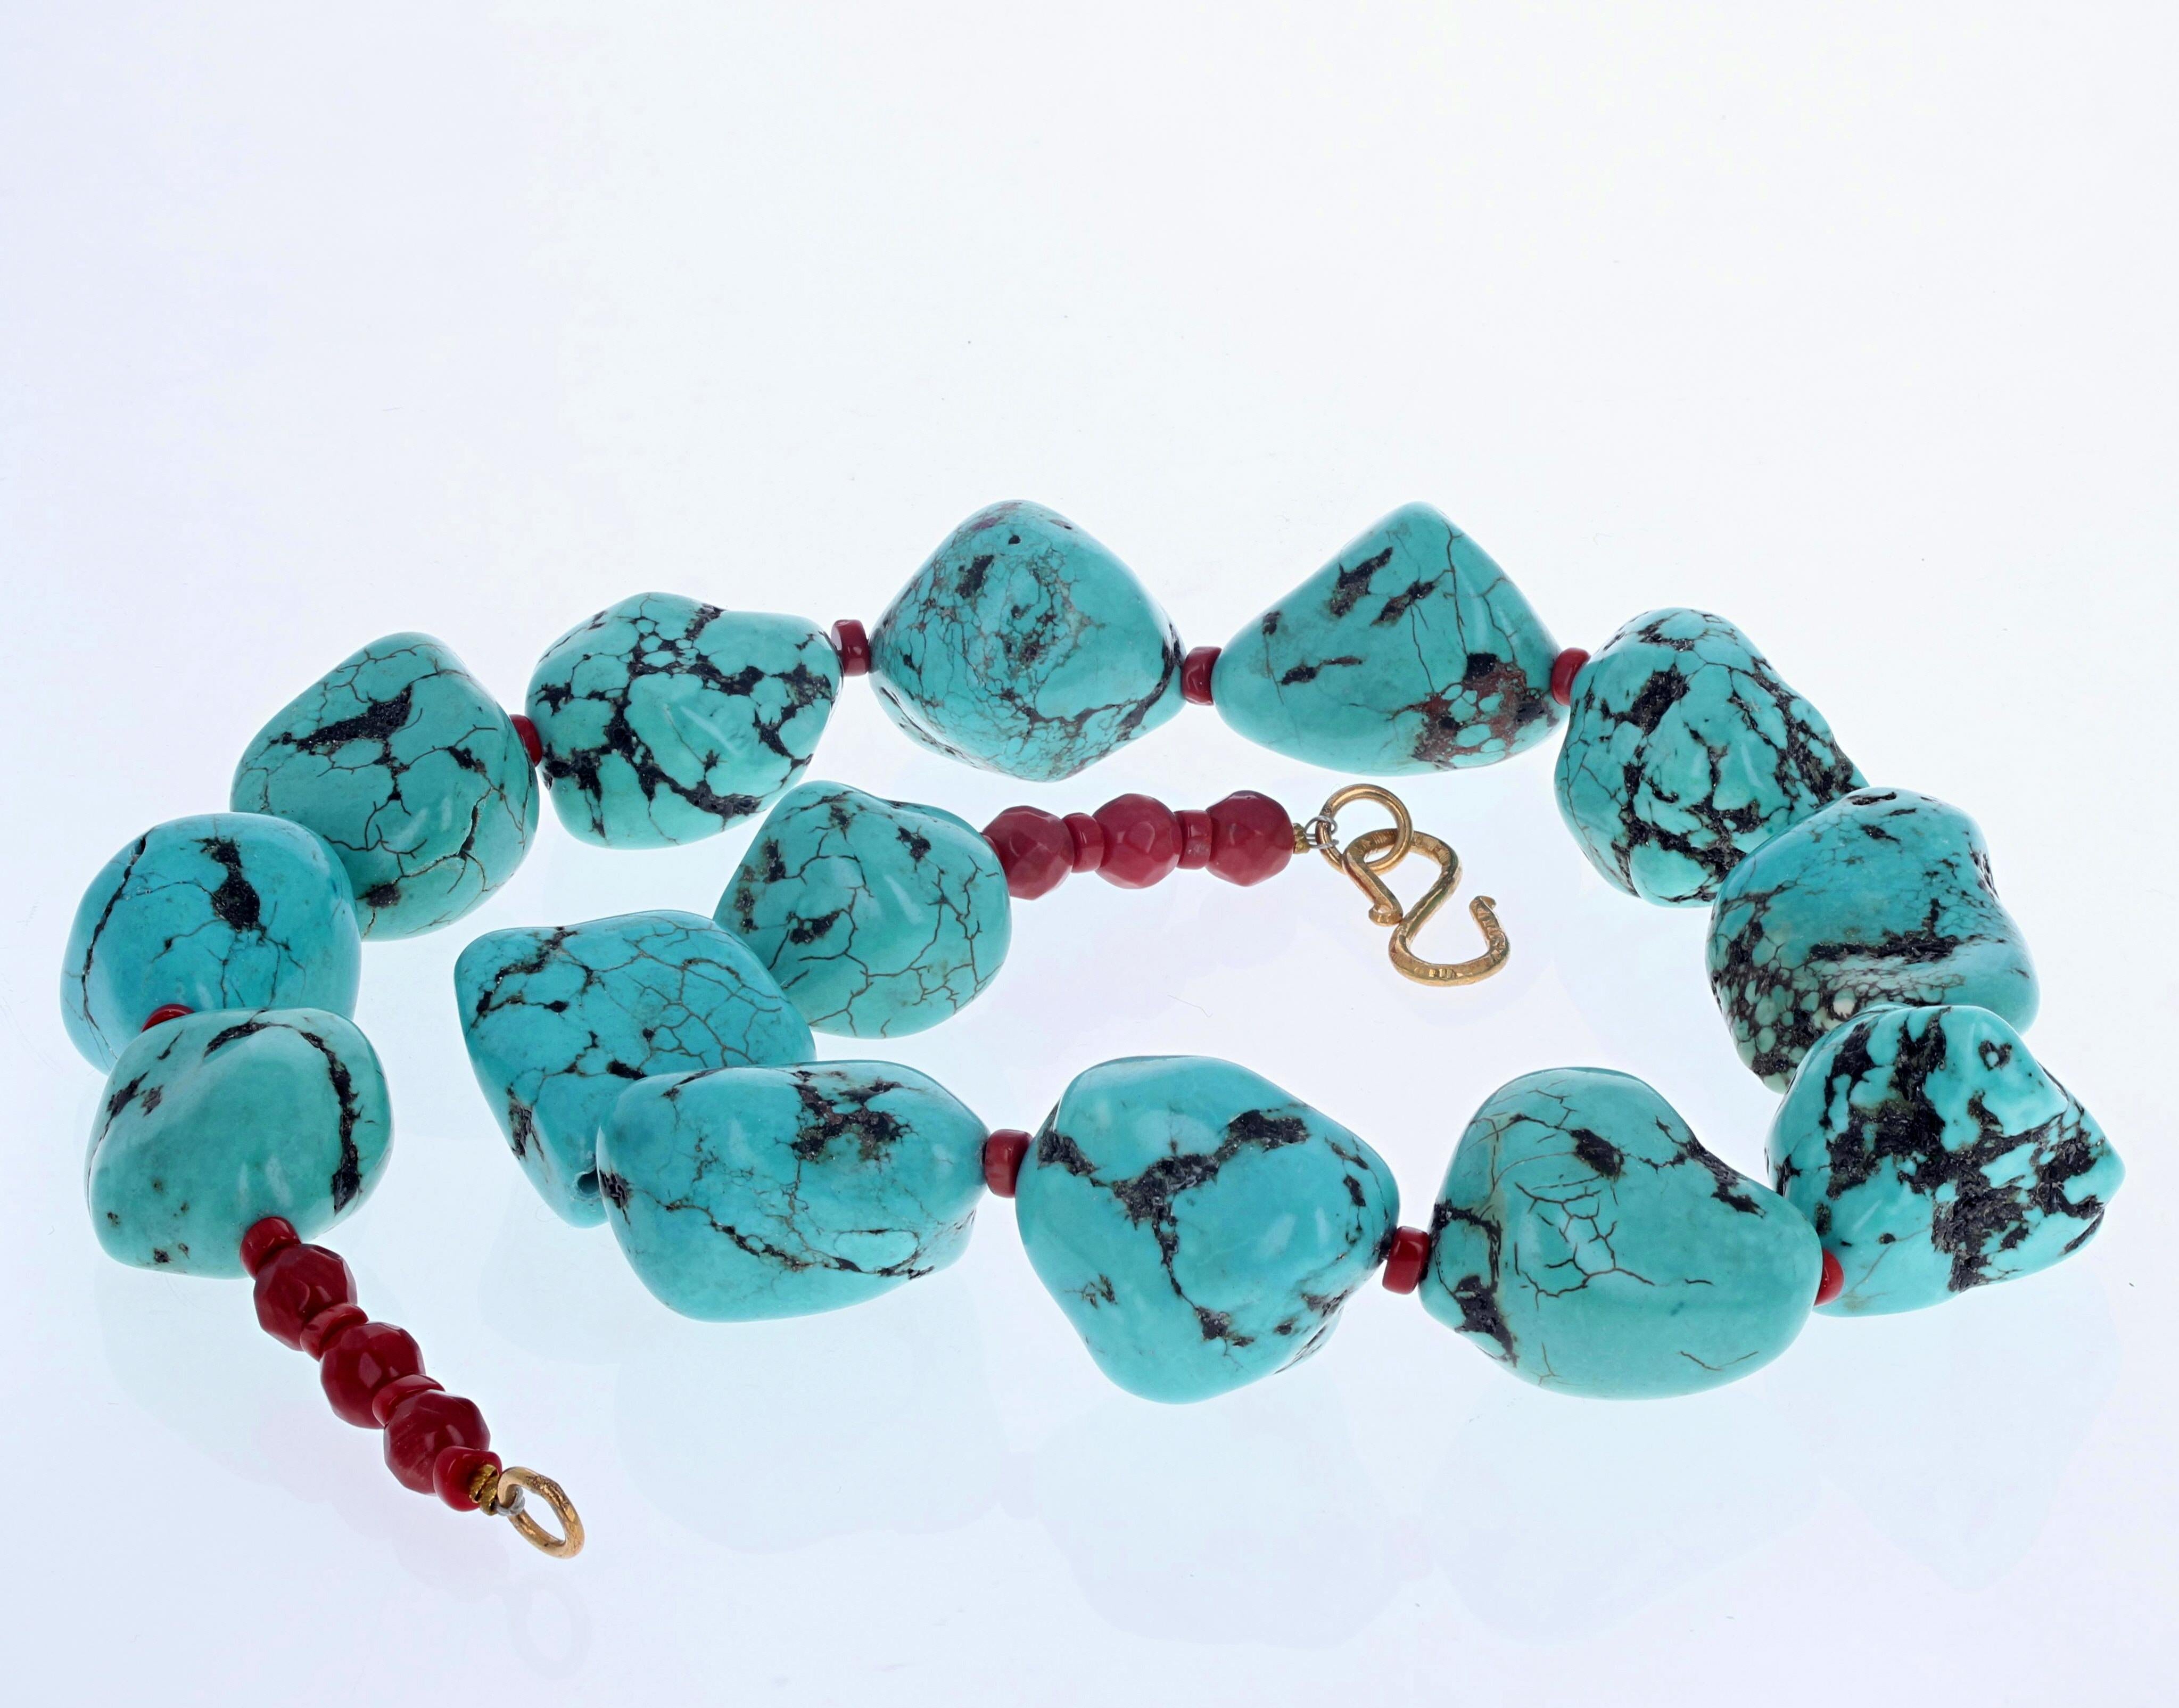 AJD Beautiful Polished Chunky Dramatic Real Turquoise & Red Coral Necklace Neuf - En vente à Raleigh, NC